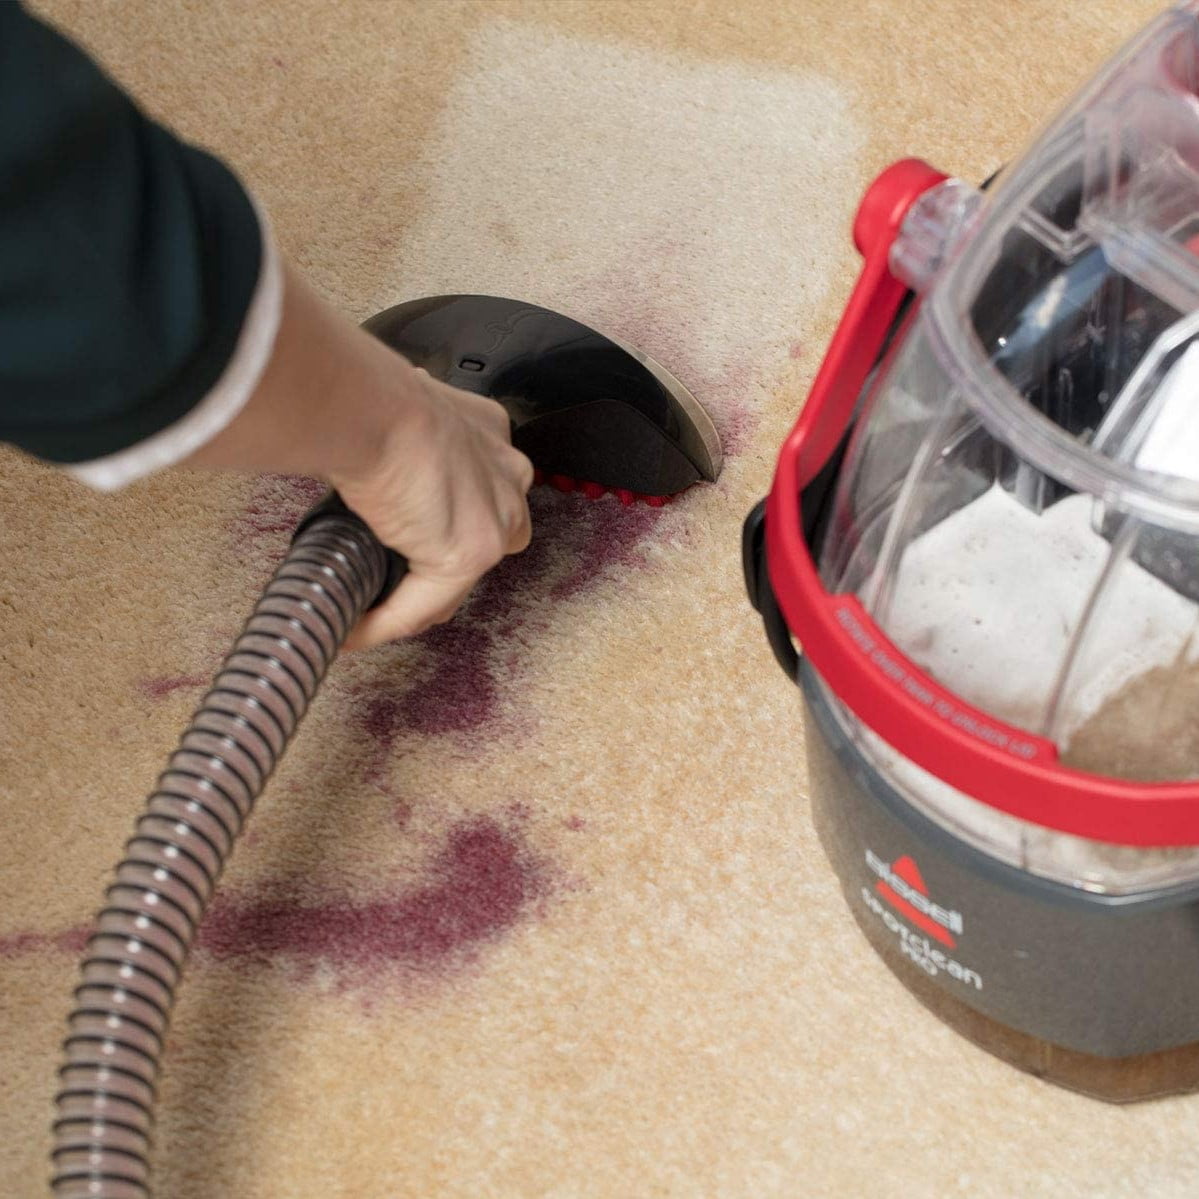 71Wmvmjurnl. Ac Sl1500 Bissell &Lt;H1&Gt;Bissell Spotclean Pro Portable Carpet Cleaner&Lt;/H1&Gt; Https://Www.youtube.com/Watch?V=Dgutqxbnocc Be Prepared For Unexpected Messes With The Convenience Of The Bissell Spotclean Pro. It Helps Remove Spots And Stains From Wherever You Find Them Using Water, Bissell Detergent And Handheld Cleaning Tools With Powerful Suction. From High-Traffic Areas And Stairs To Upholstery, Car Interiors And More, You Have The Ideal Cleaner In The Spotclean Pro. Carpet Cleaner Bissell Spotclean Pro Portable Carpet Cleaner